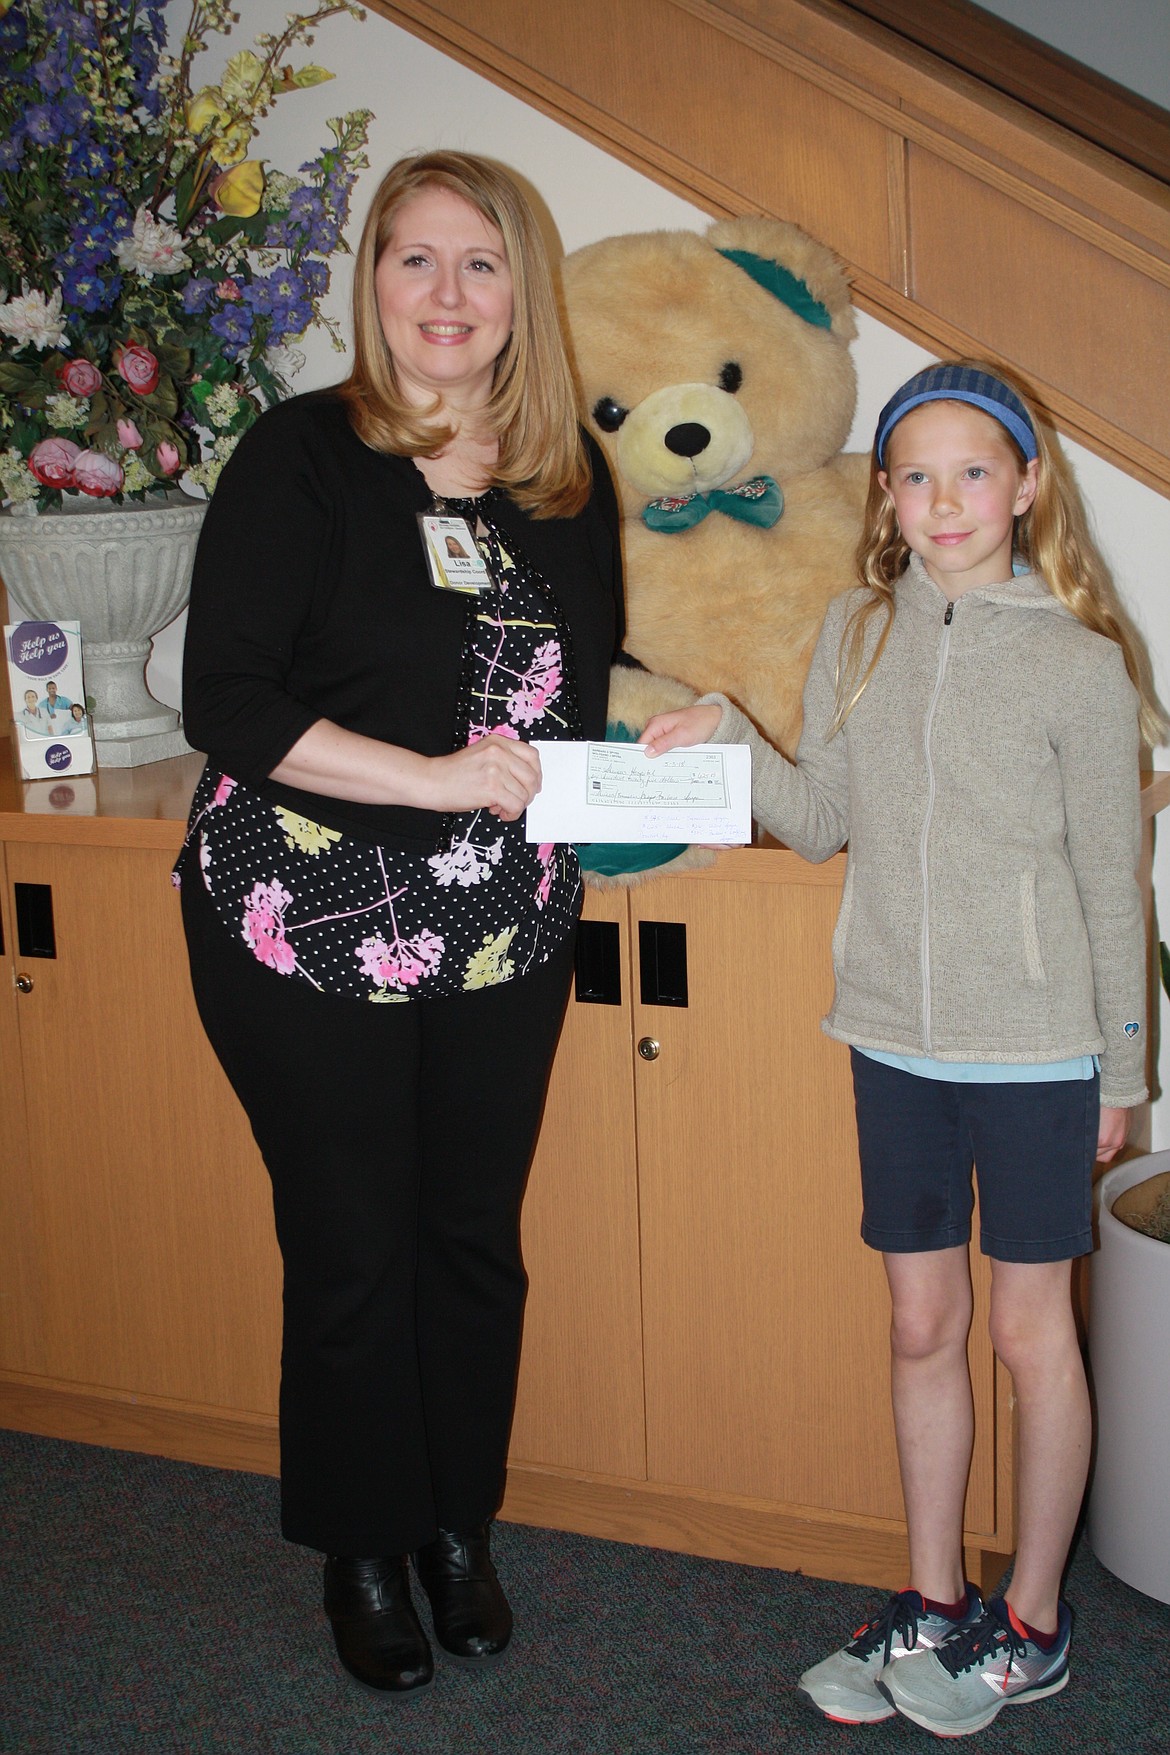 Shriners Children's Hospital &#151; Spokane physical therapist Barb Harrison receives a check for nearly $400 from Sorensen fifth-grader Emmaline Spyra early Thursday morning. Emmaline was inspired to donate to the hospital to help kids with clubfeet after reading about the condition in a historical fiction novel and seeing a homeless man with clubfeet while on a family trip. (Courtesy photo)